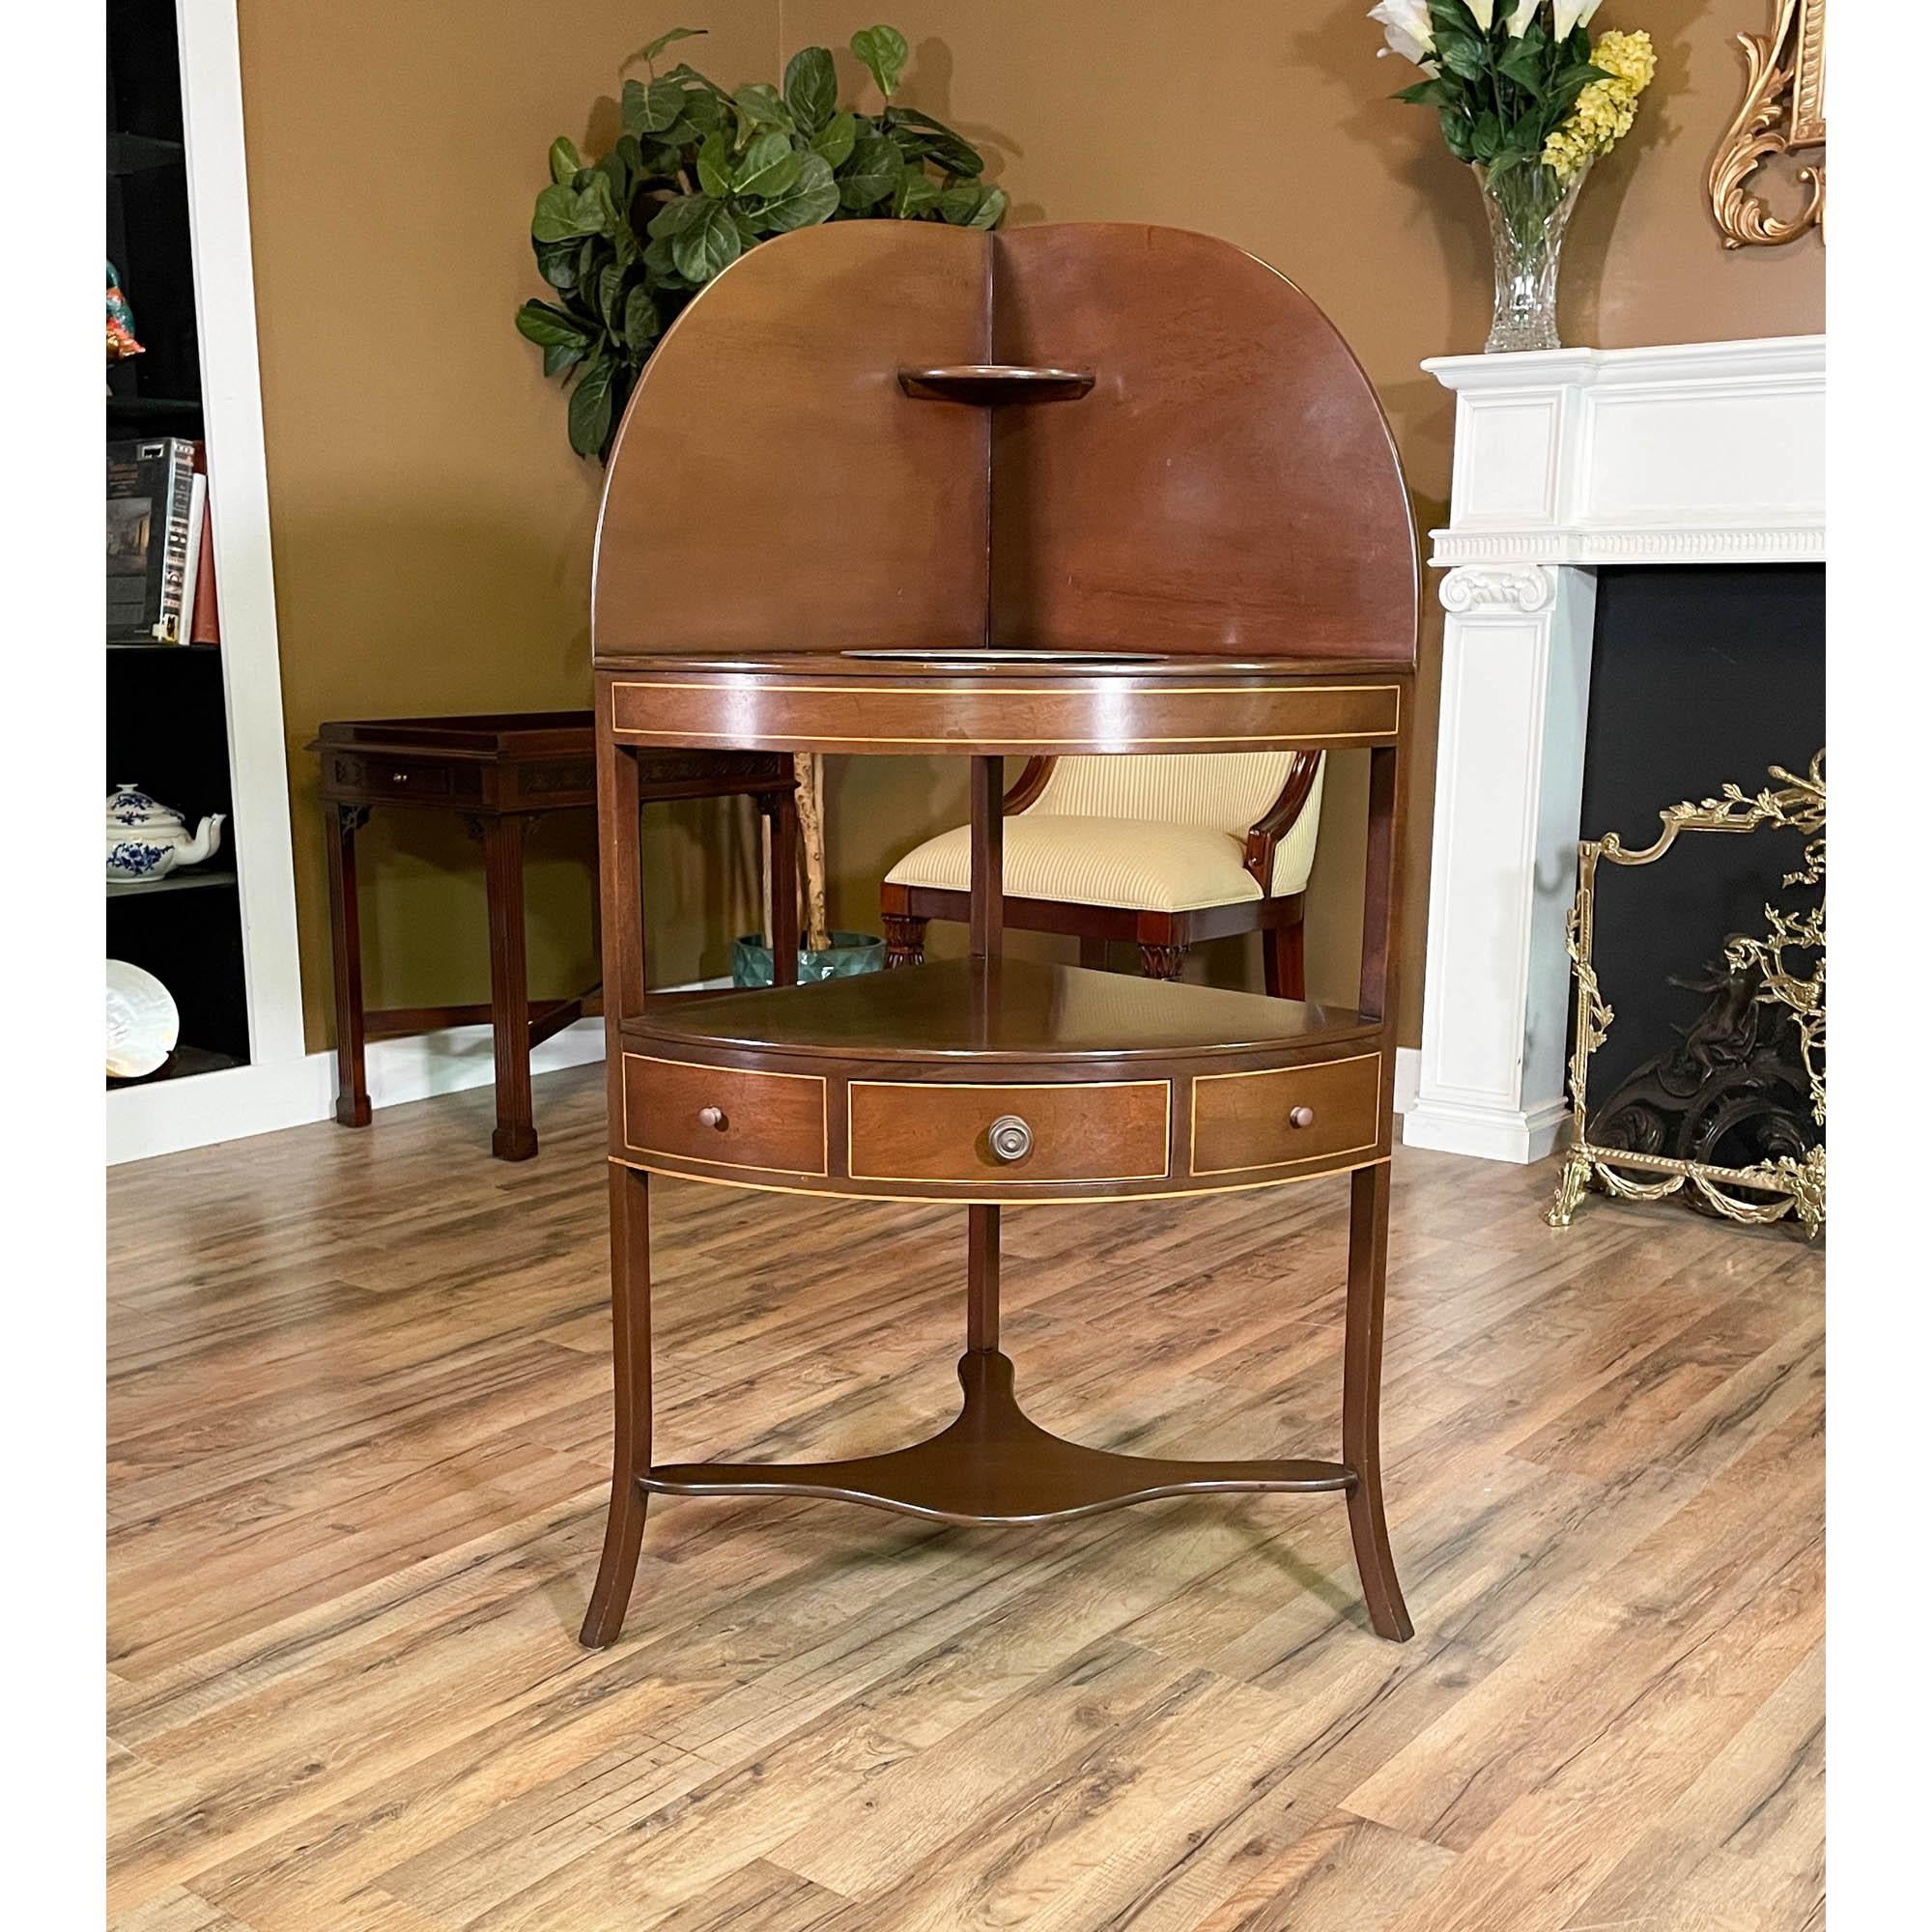 From Niagara Furniture a Vintage Kittinger Corner Mahogany Stand. While petite and elegant this faithful antique reproduction is also sturdy and strong. Great quality construction is the hall mark of the Vintage Kittinger Corner Mahogany Stand and